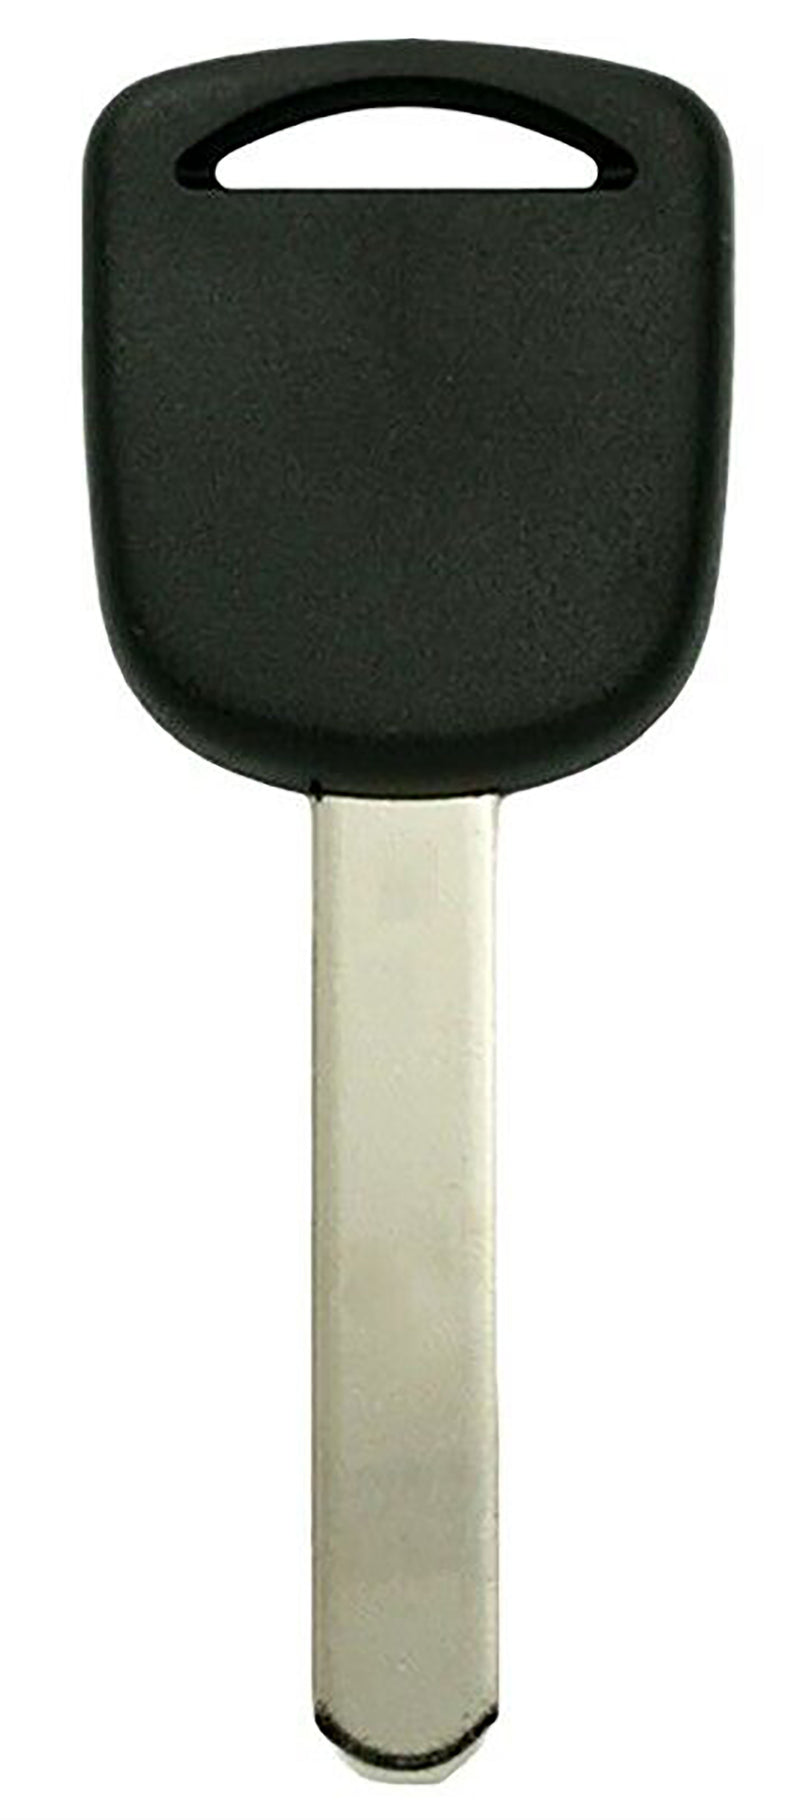 1x New Replacement Transponder Key Compatible with & Fit For Honda Vehicles MEGAMOS 13 F Chip - MPN HO01-03